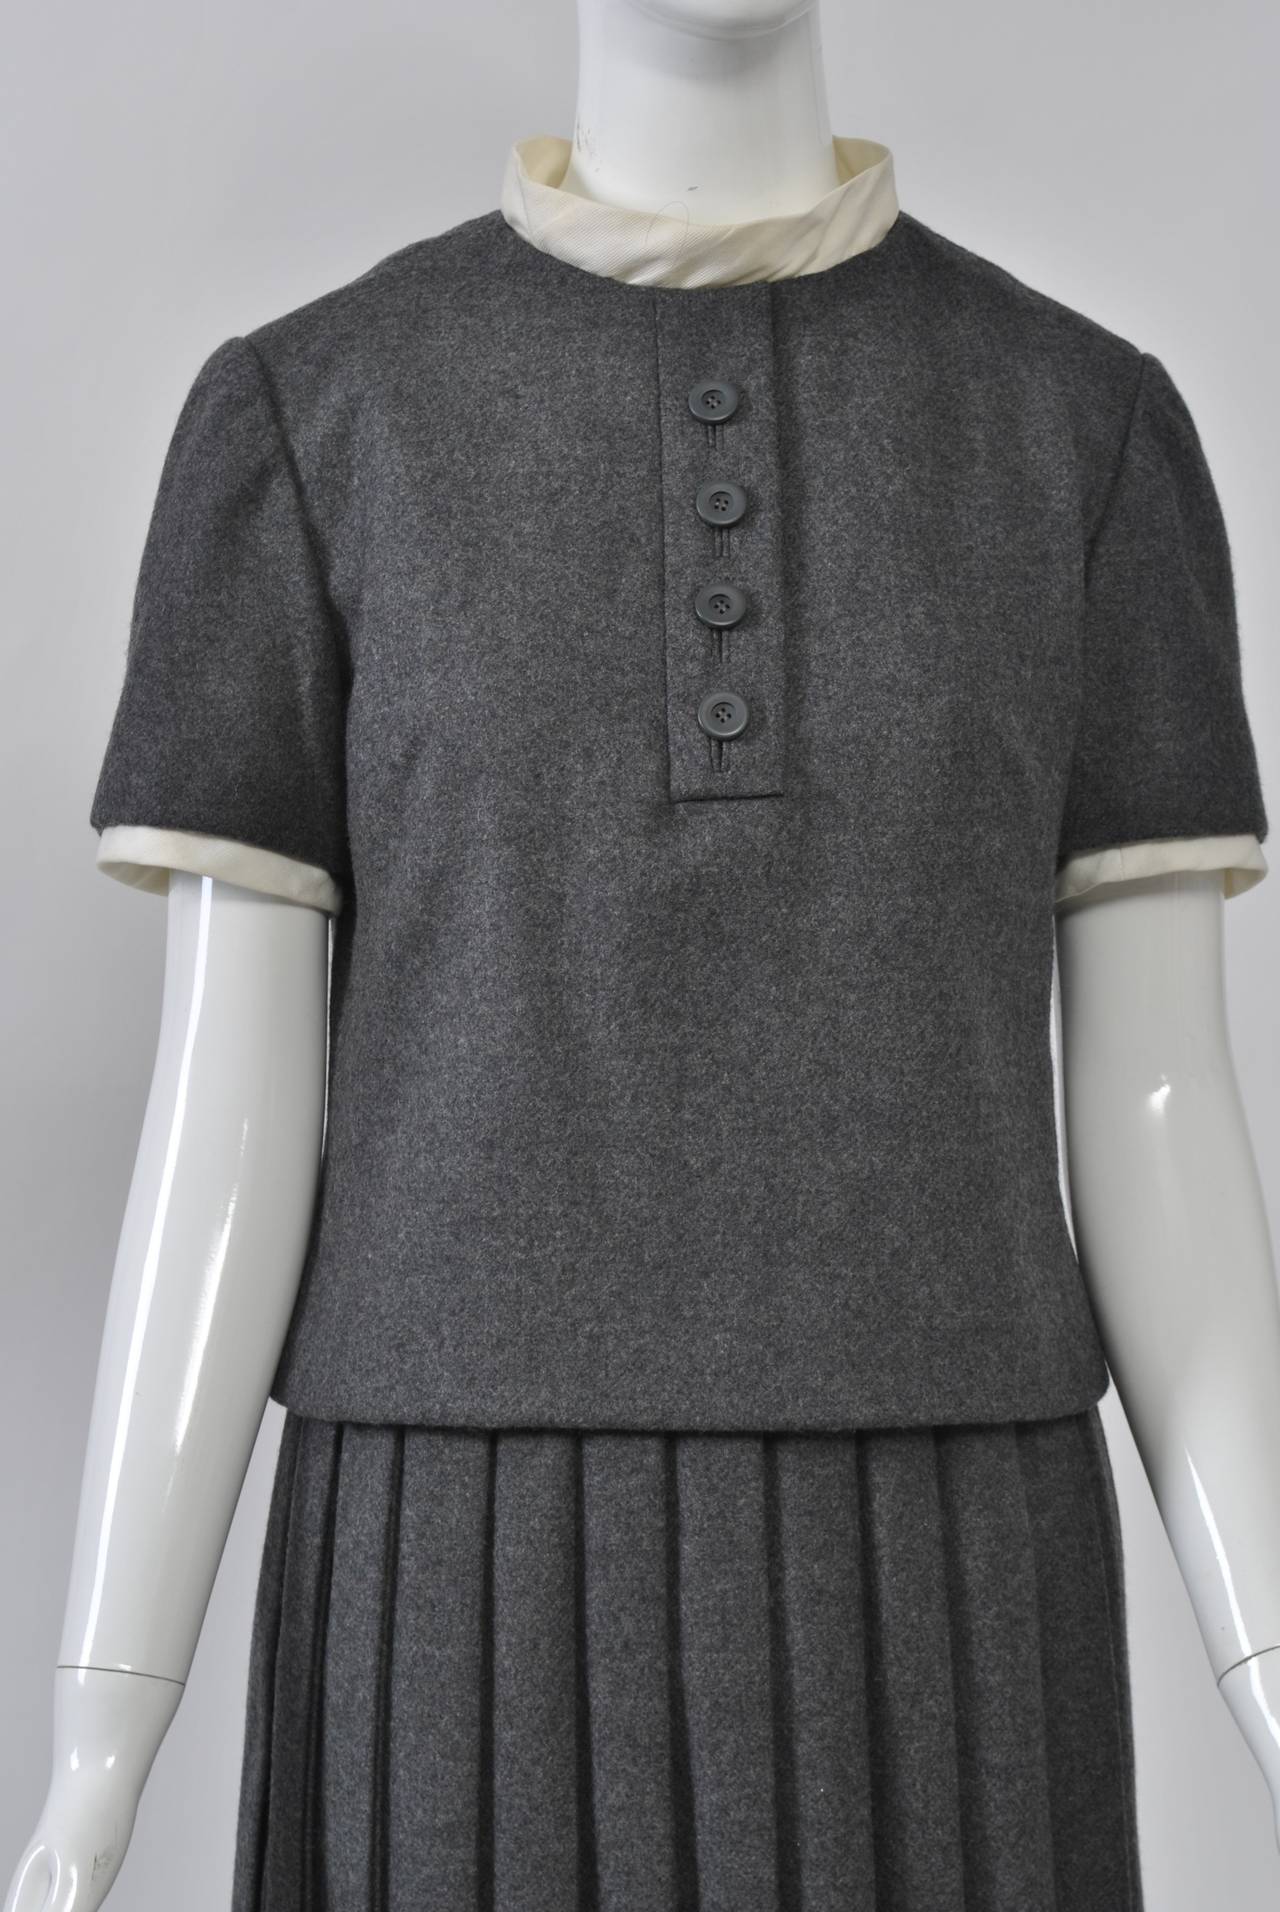 Christian Dior-New York c. 1960 two-piece dress in charcoal wool with white cotton detachable collar and cuff attachments. The short-sleeve, hip-length overtop has a tab and four buttons down the front and a back zipper. the skirt has double-knife